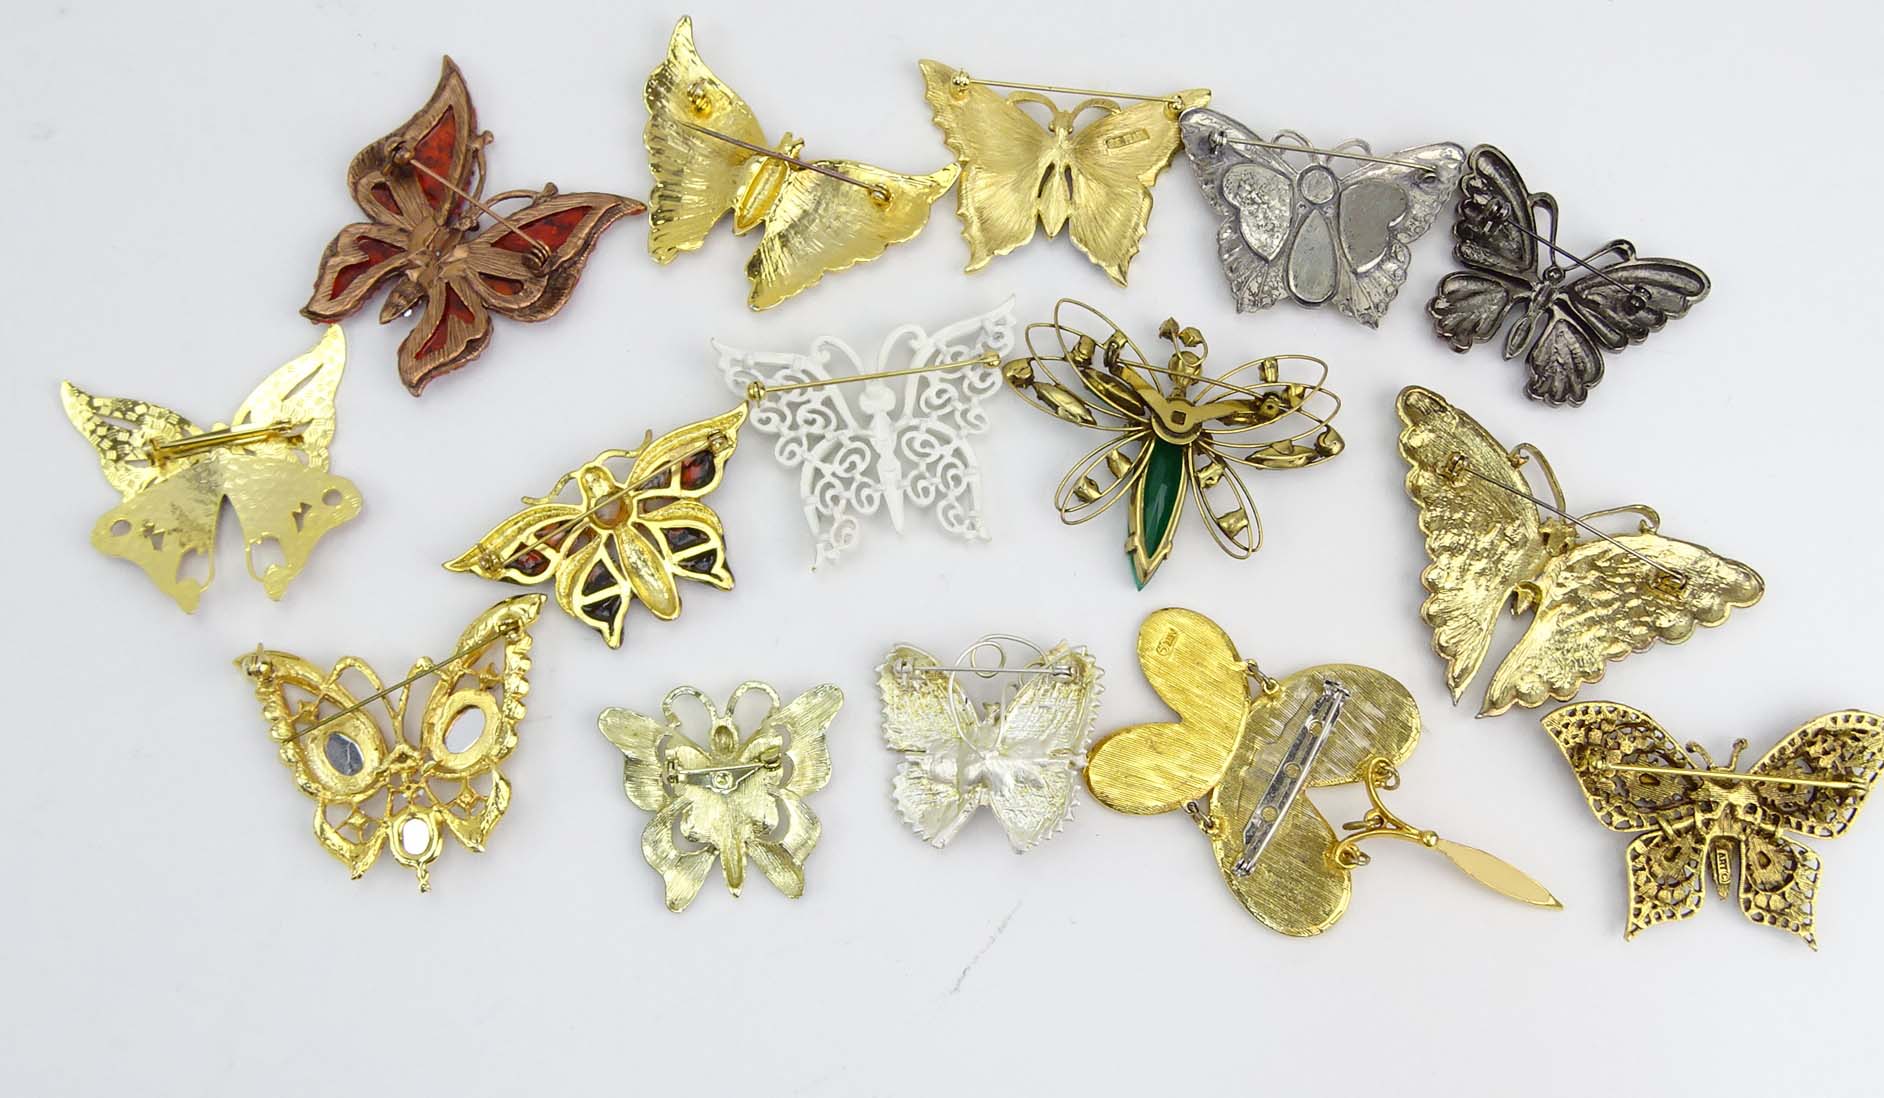 Collection of Fifteen (15) Fashion Butterfly Brooches variously with enamel and faux gem stones.